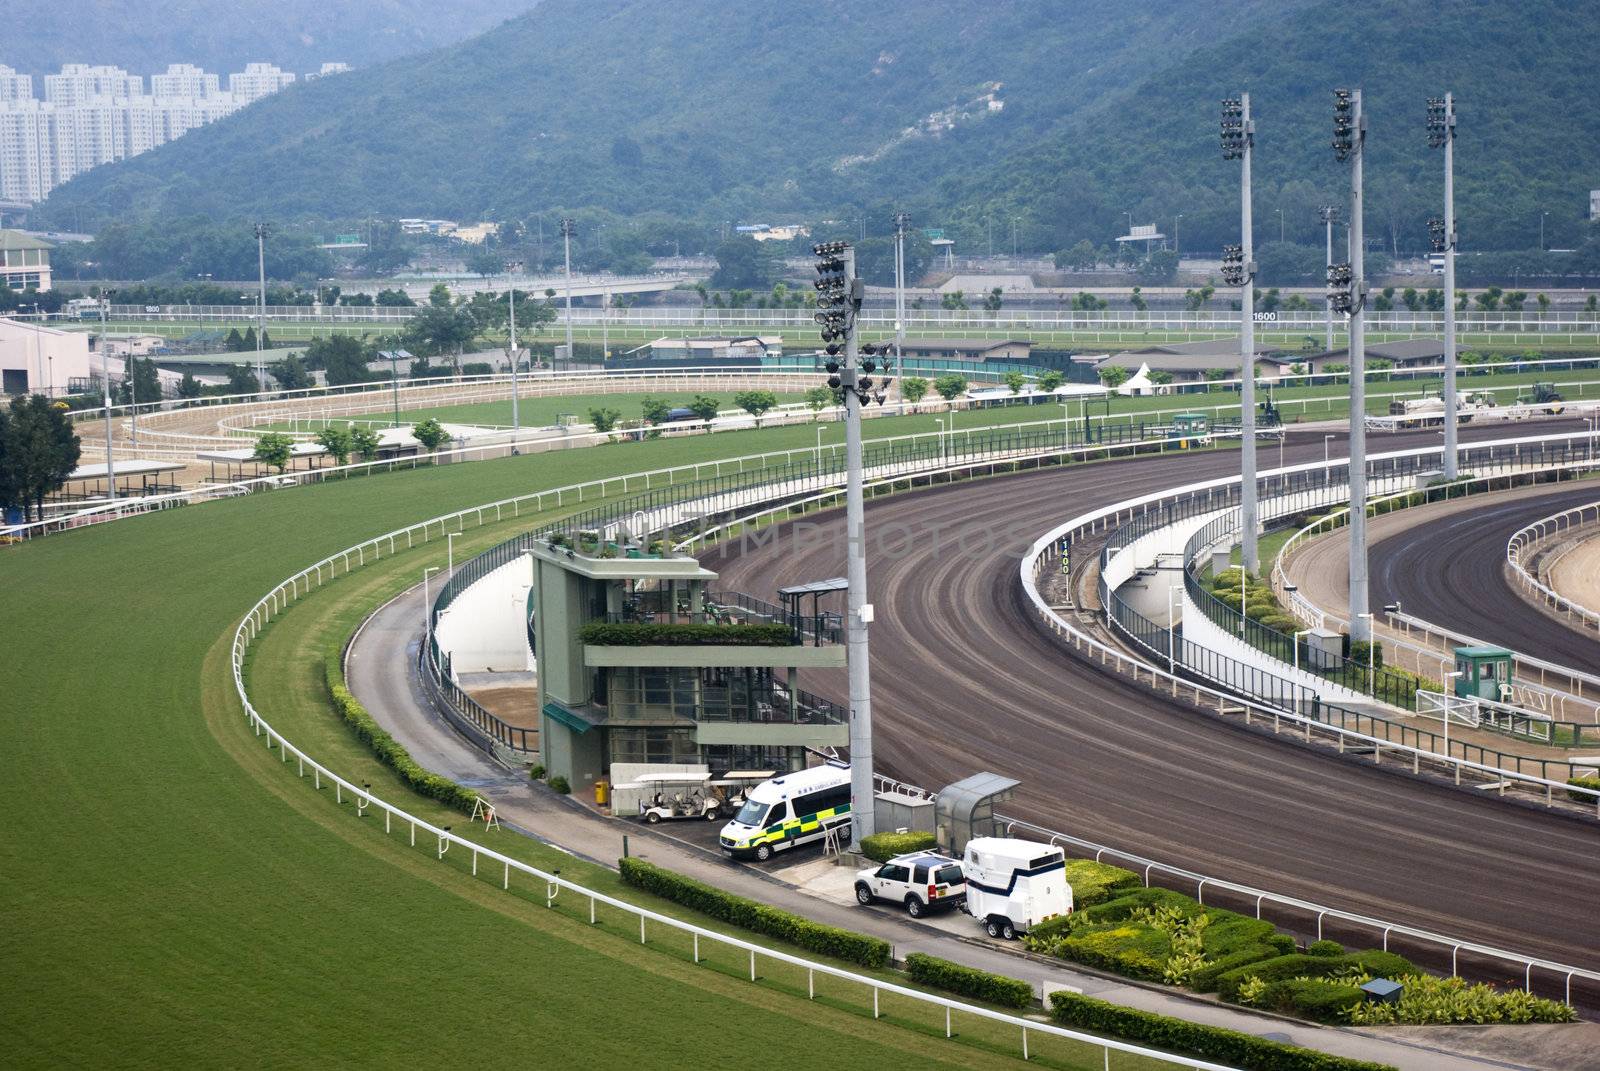 it is a shot of horse race empty track.